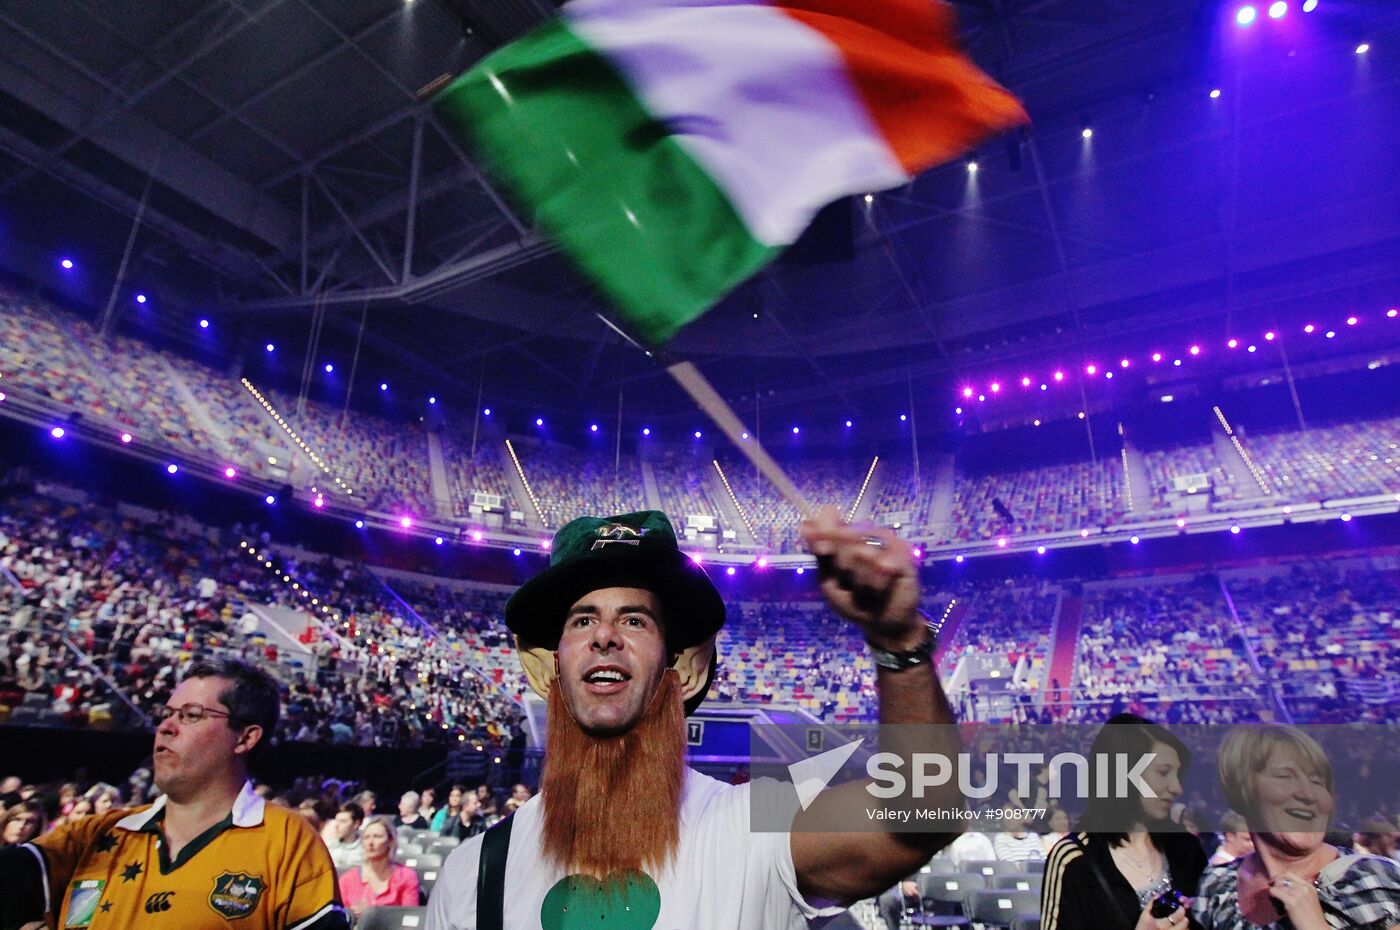 Eurovision Song Contest - 2011. First Semifinal